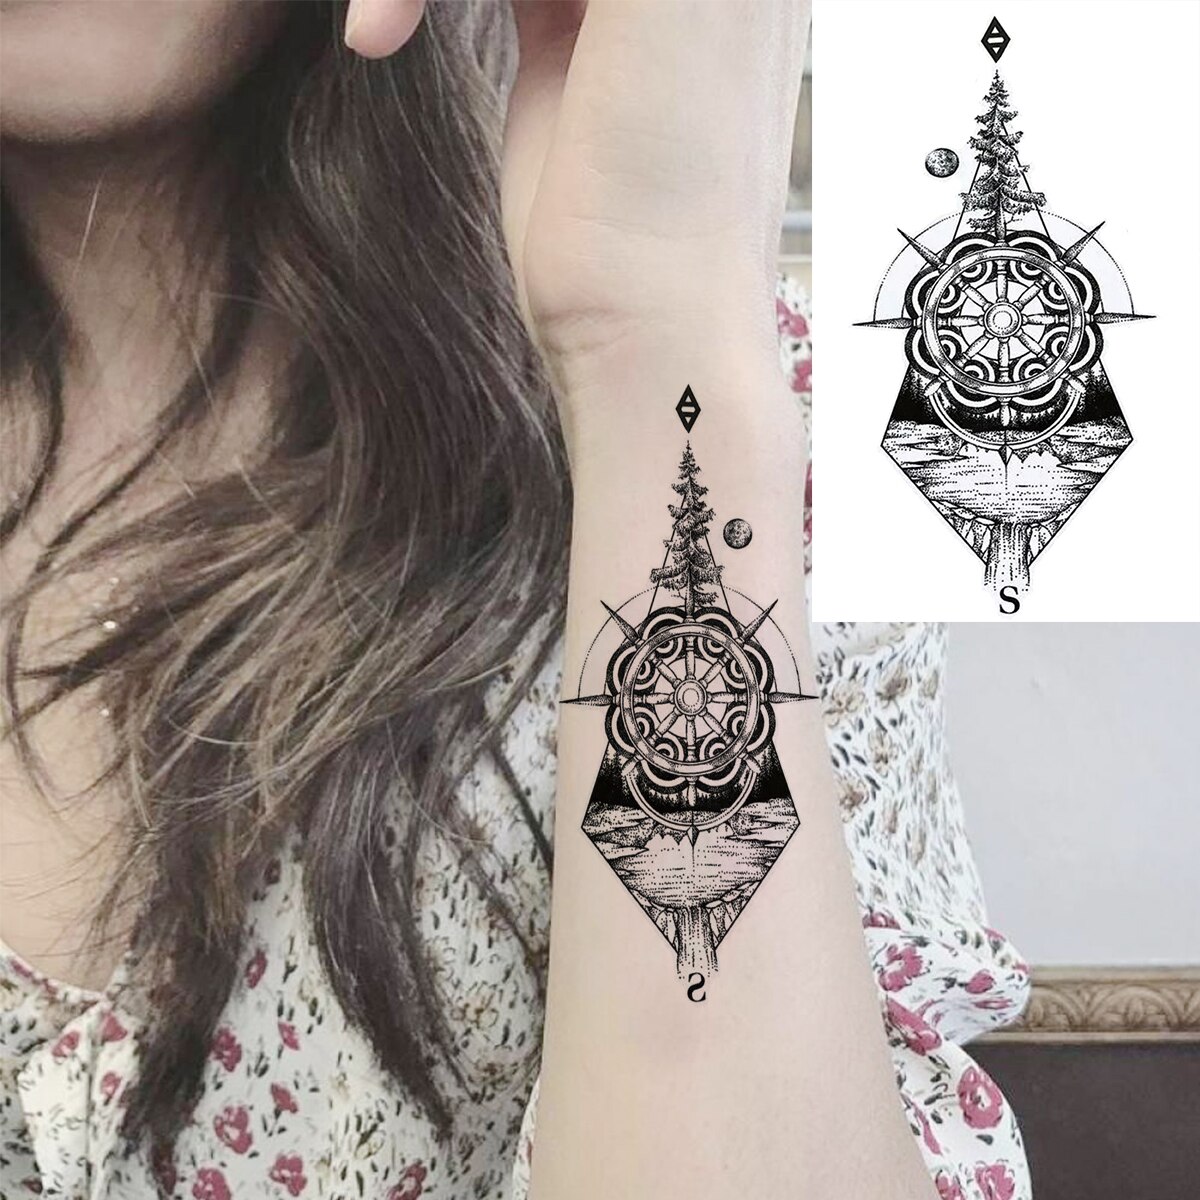 Universe Astronaut Ears Temporary Tattoos For Women Adult Dream Catcher Rose Flower Compass Fake Tattoo Fashion Washable Tatoos